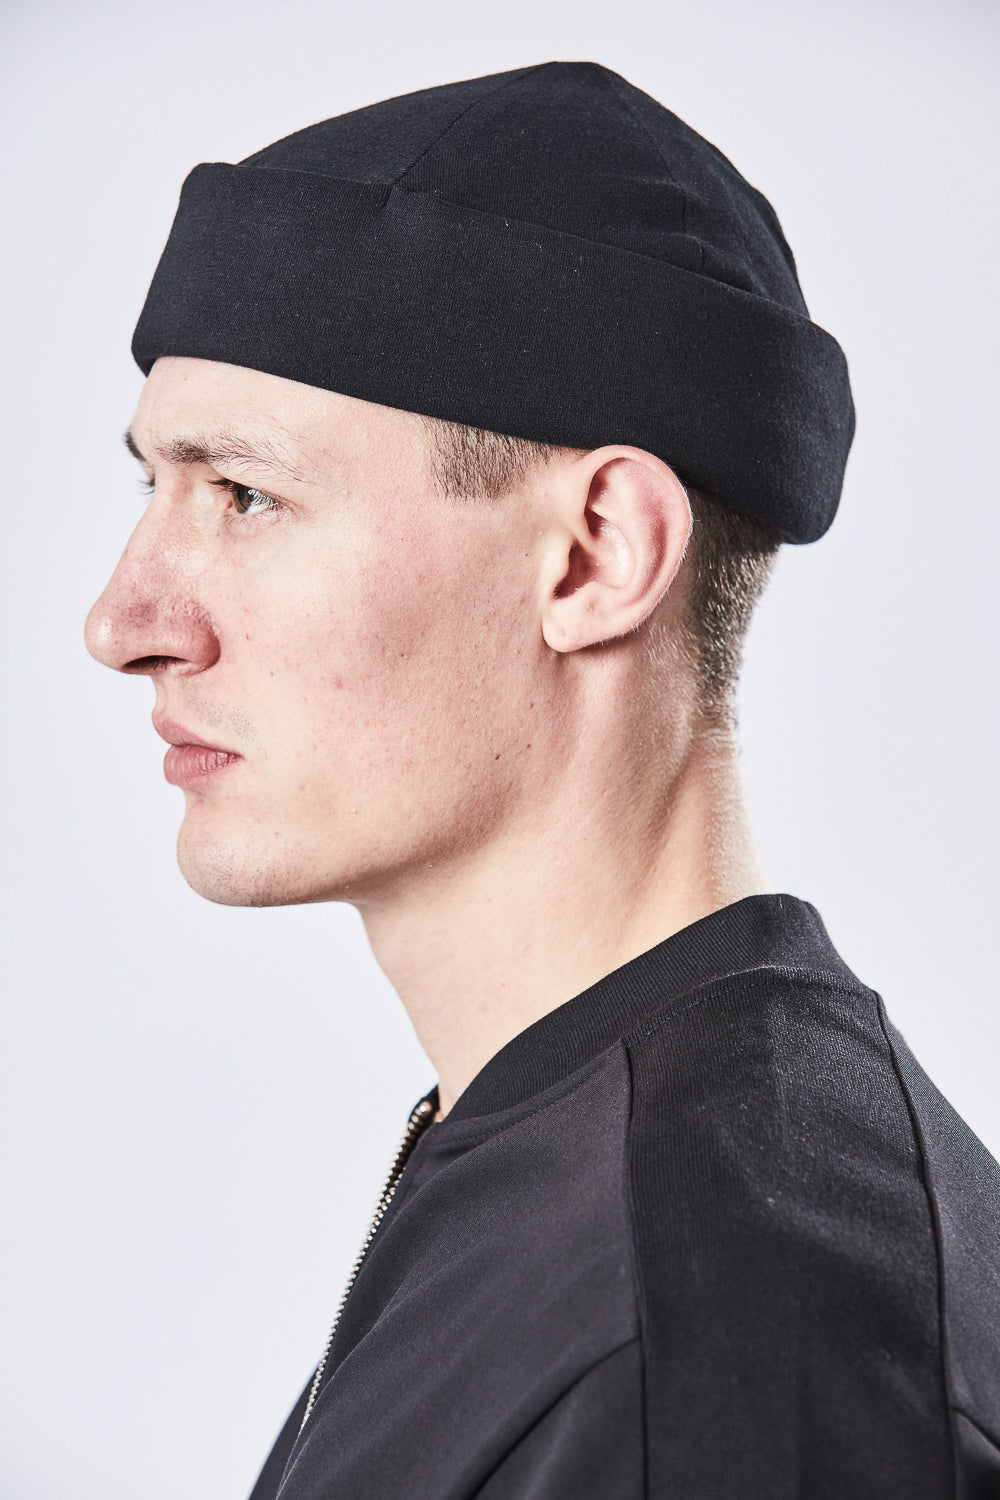 Buy the Thom Krom Cap 55 in Black at Intro. Spend £50 for free UK delivery. Official stockists. We ship worldwide.